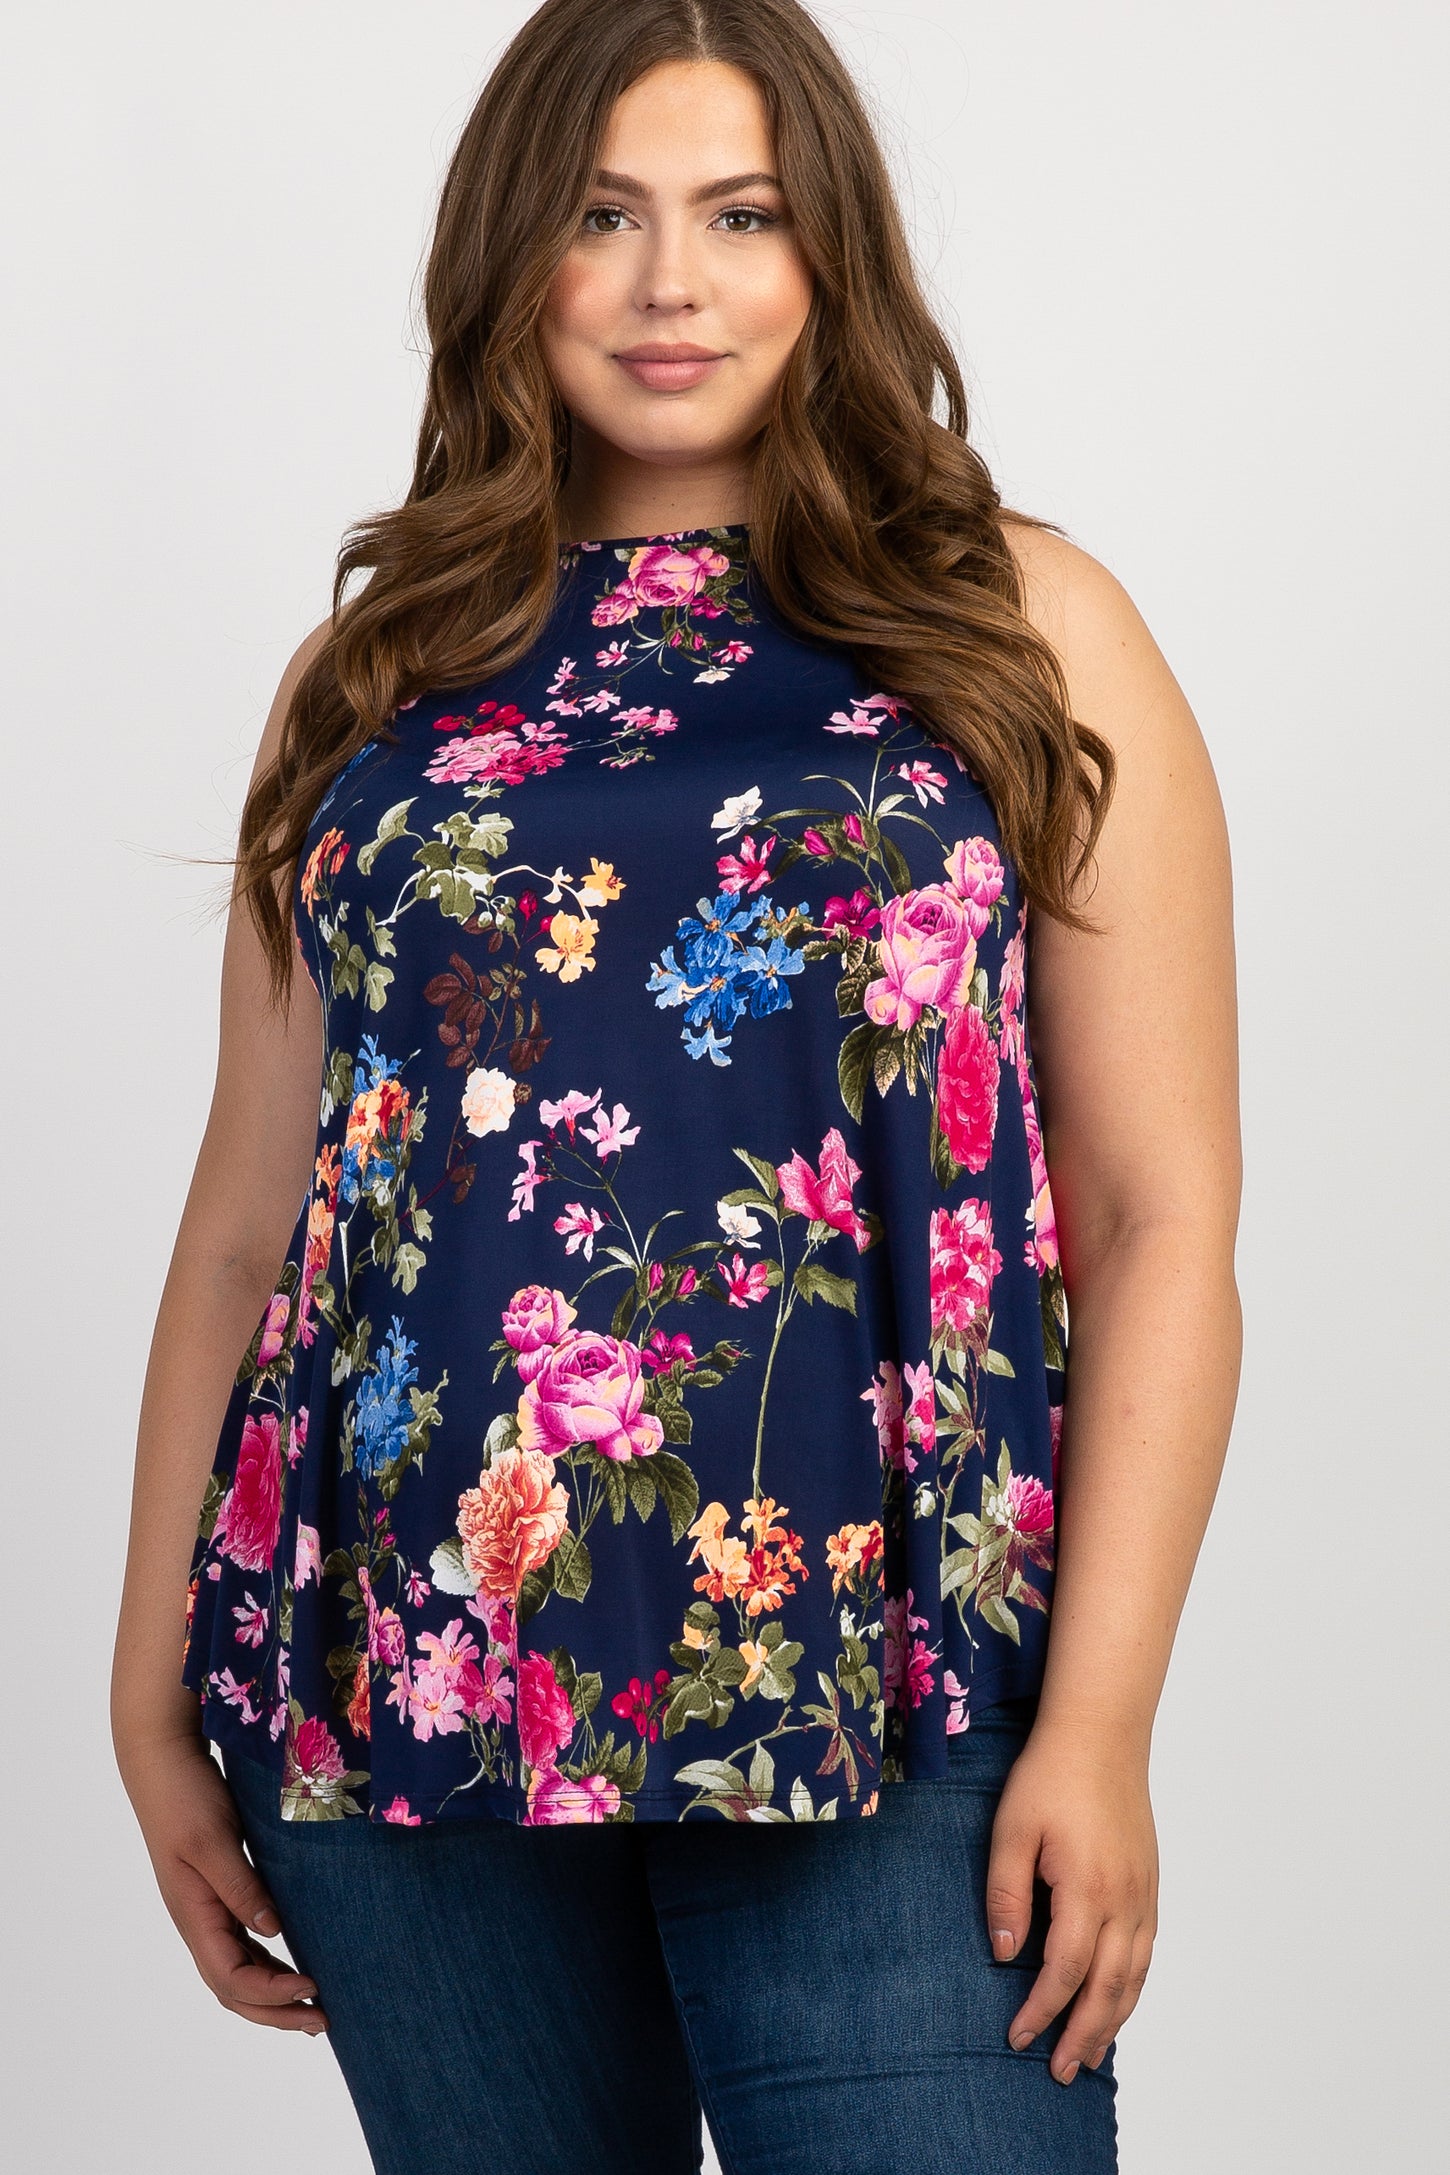 Navy Floral Sleeveless Plus Maternity Top